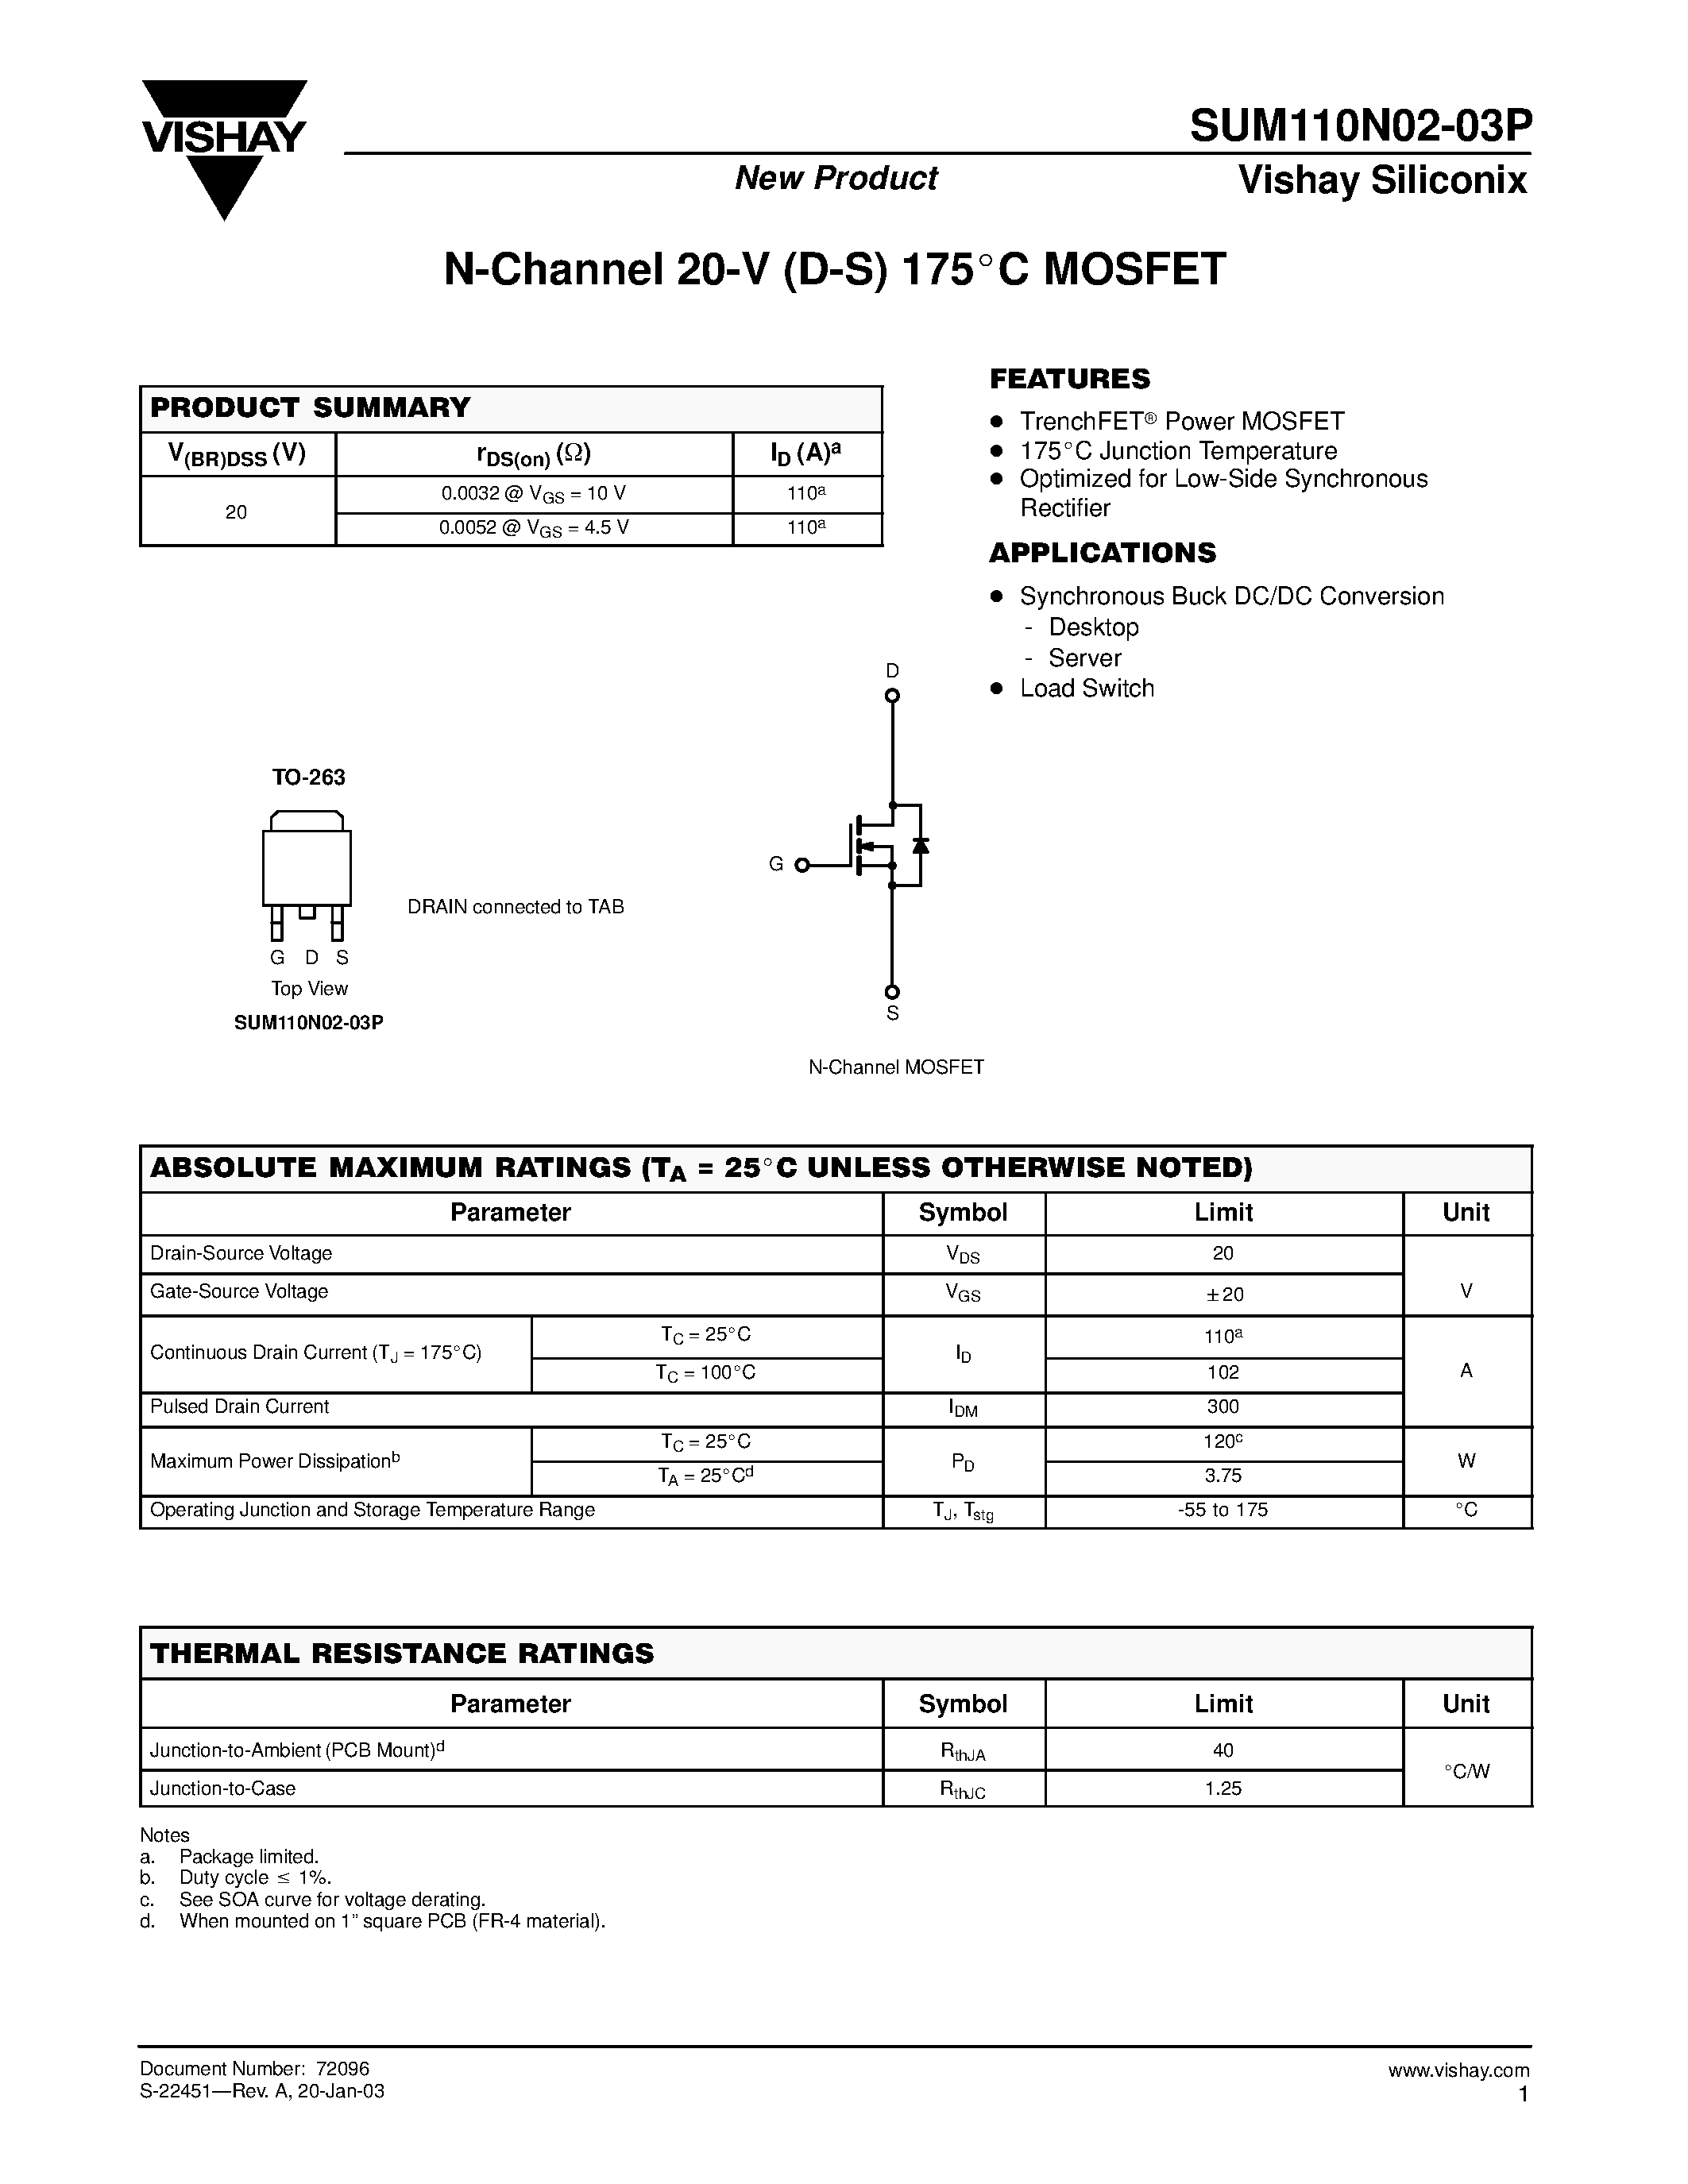 Datasheet SUM110N02-03P - N-Channel 20-V (D-S) 175 C MOSFET page 1